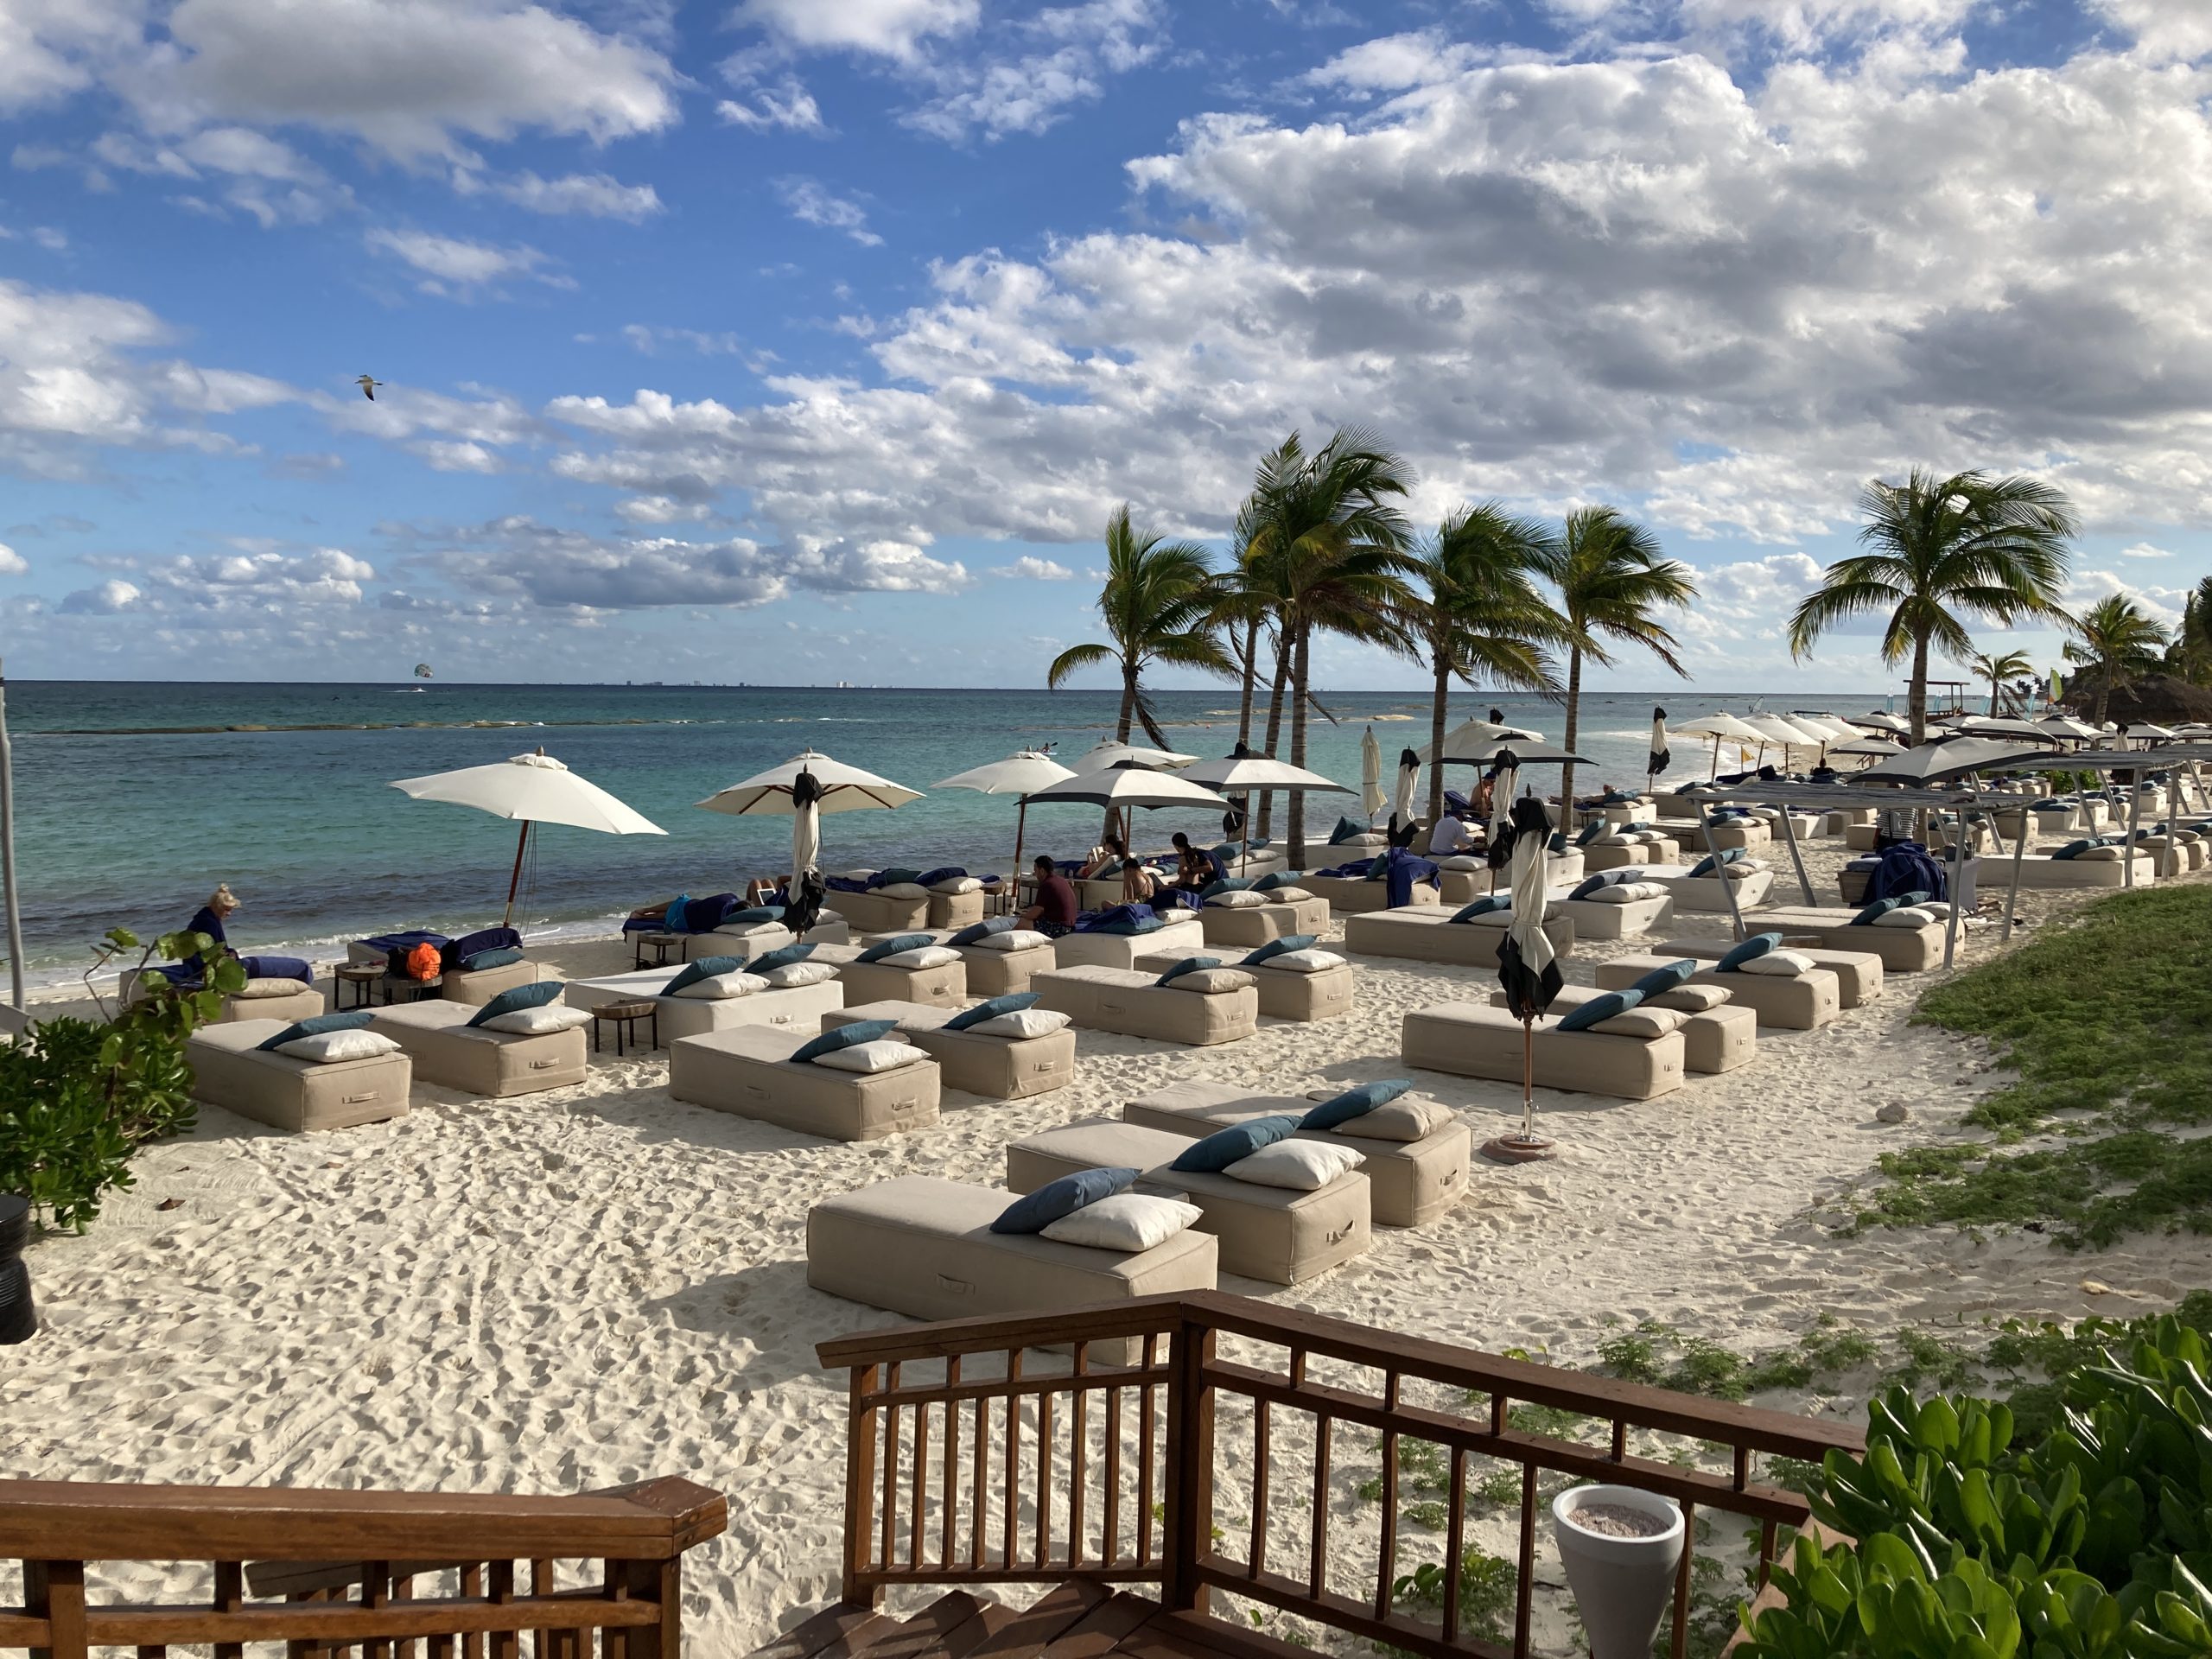 Andaz Mayakoba Resort Review – This Mexican Resort is “Wow!”